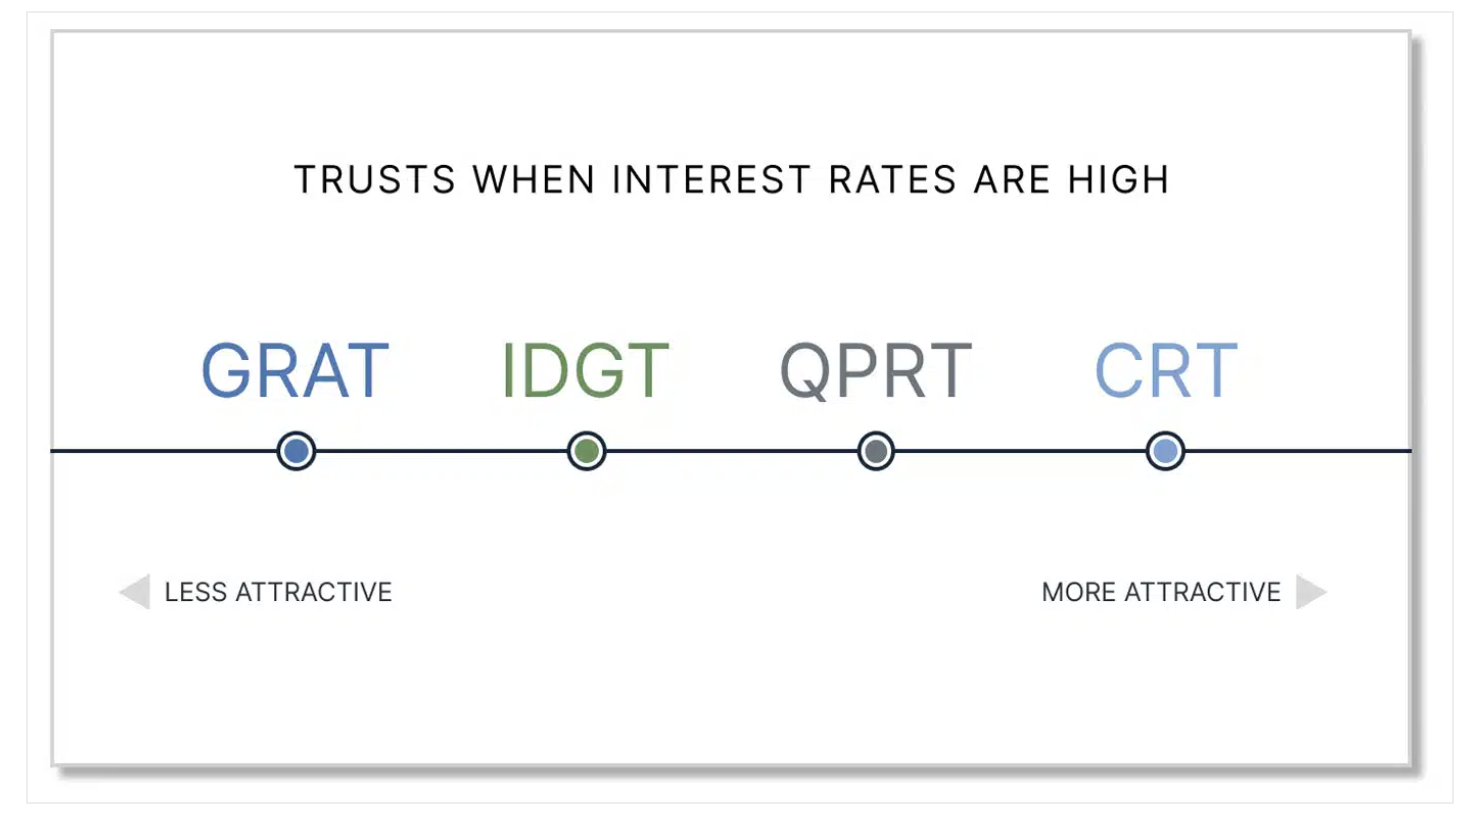 Trusts When Interest Rates are High